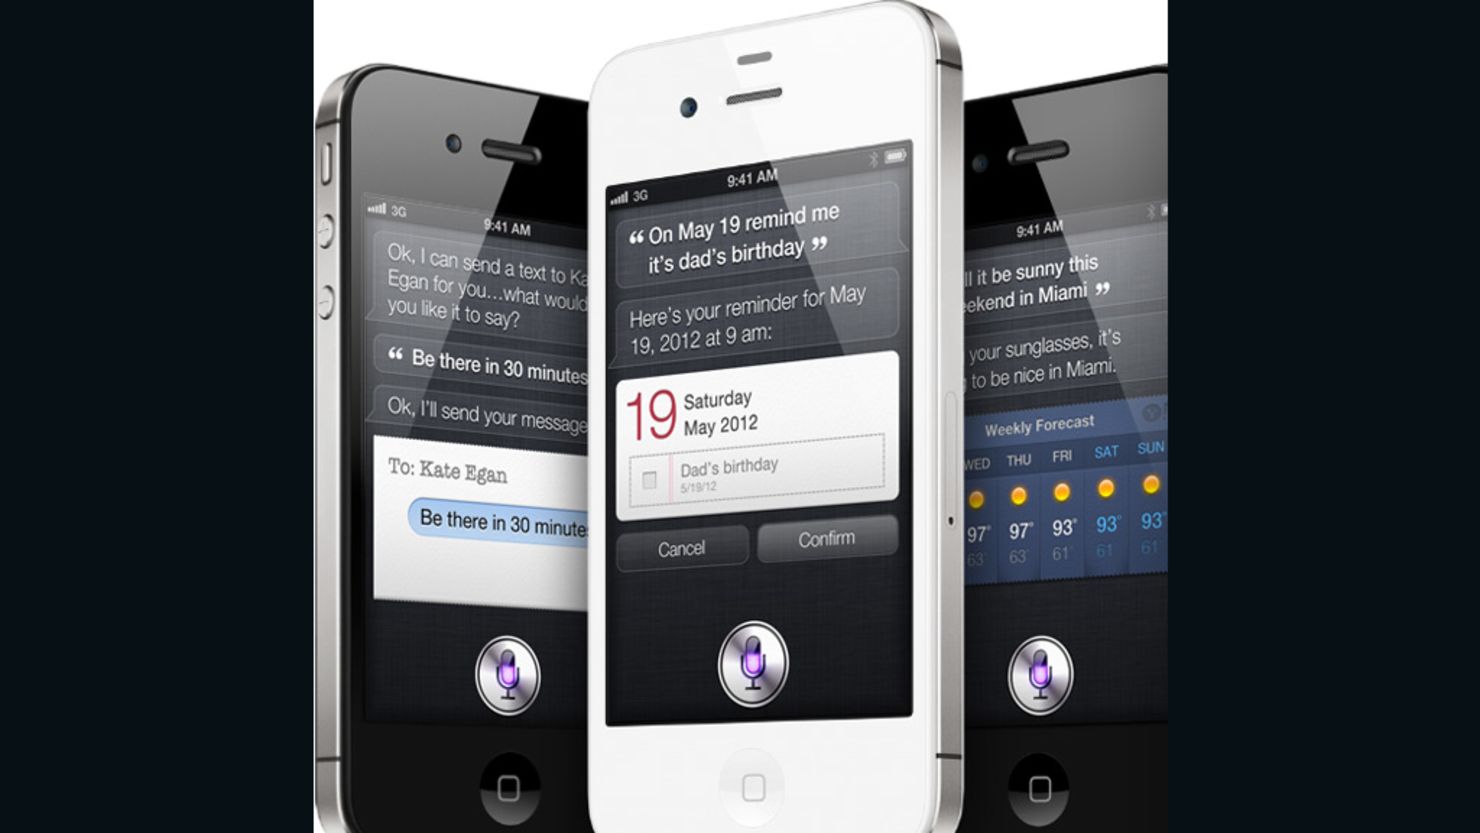 Siri, the voice-enabled "personal assistant" on the iPhone 4S, usually listens and talks back on a range of issues.